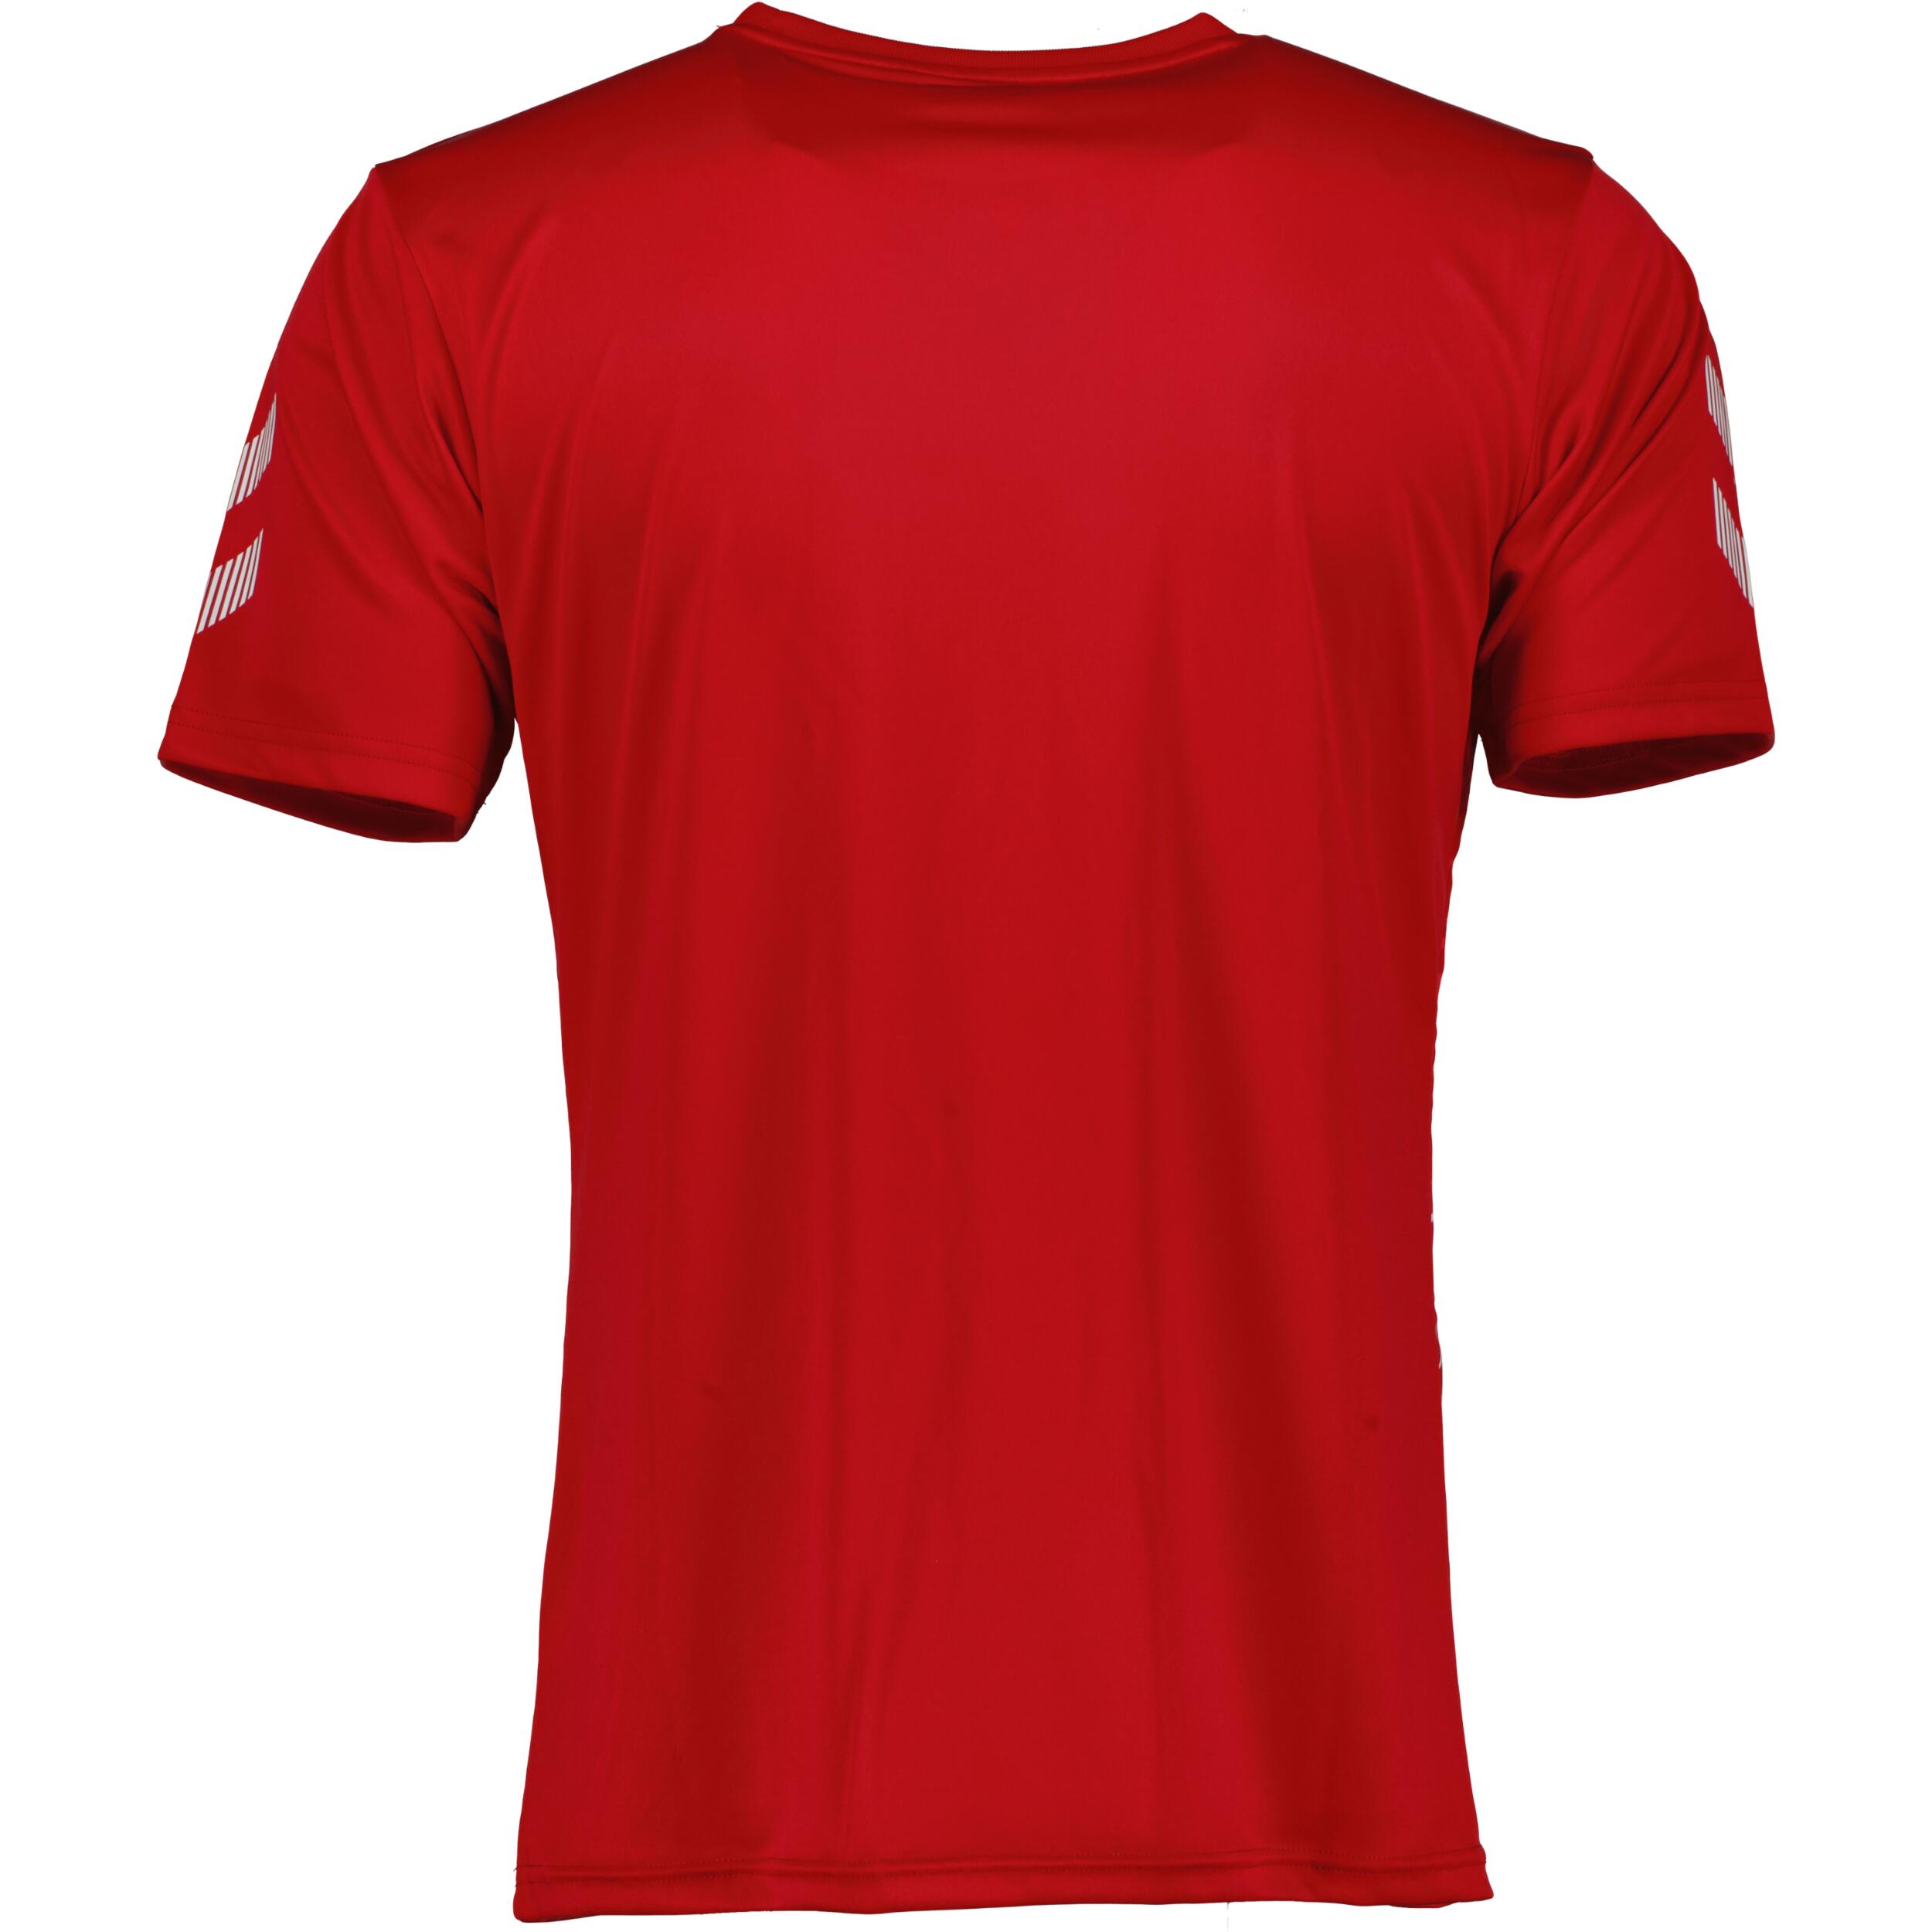 Hydro jersey for kids, great for football, in true red/dark red/white 2/3